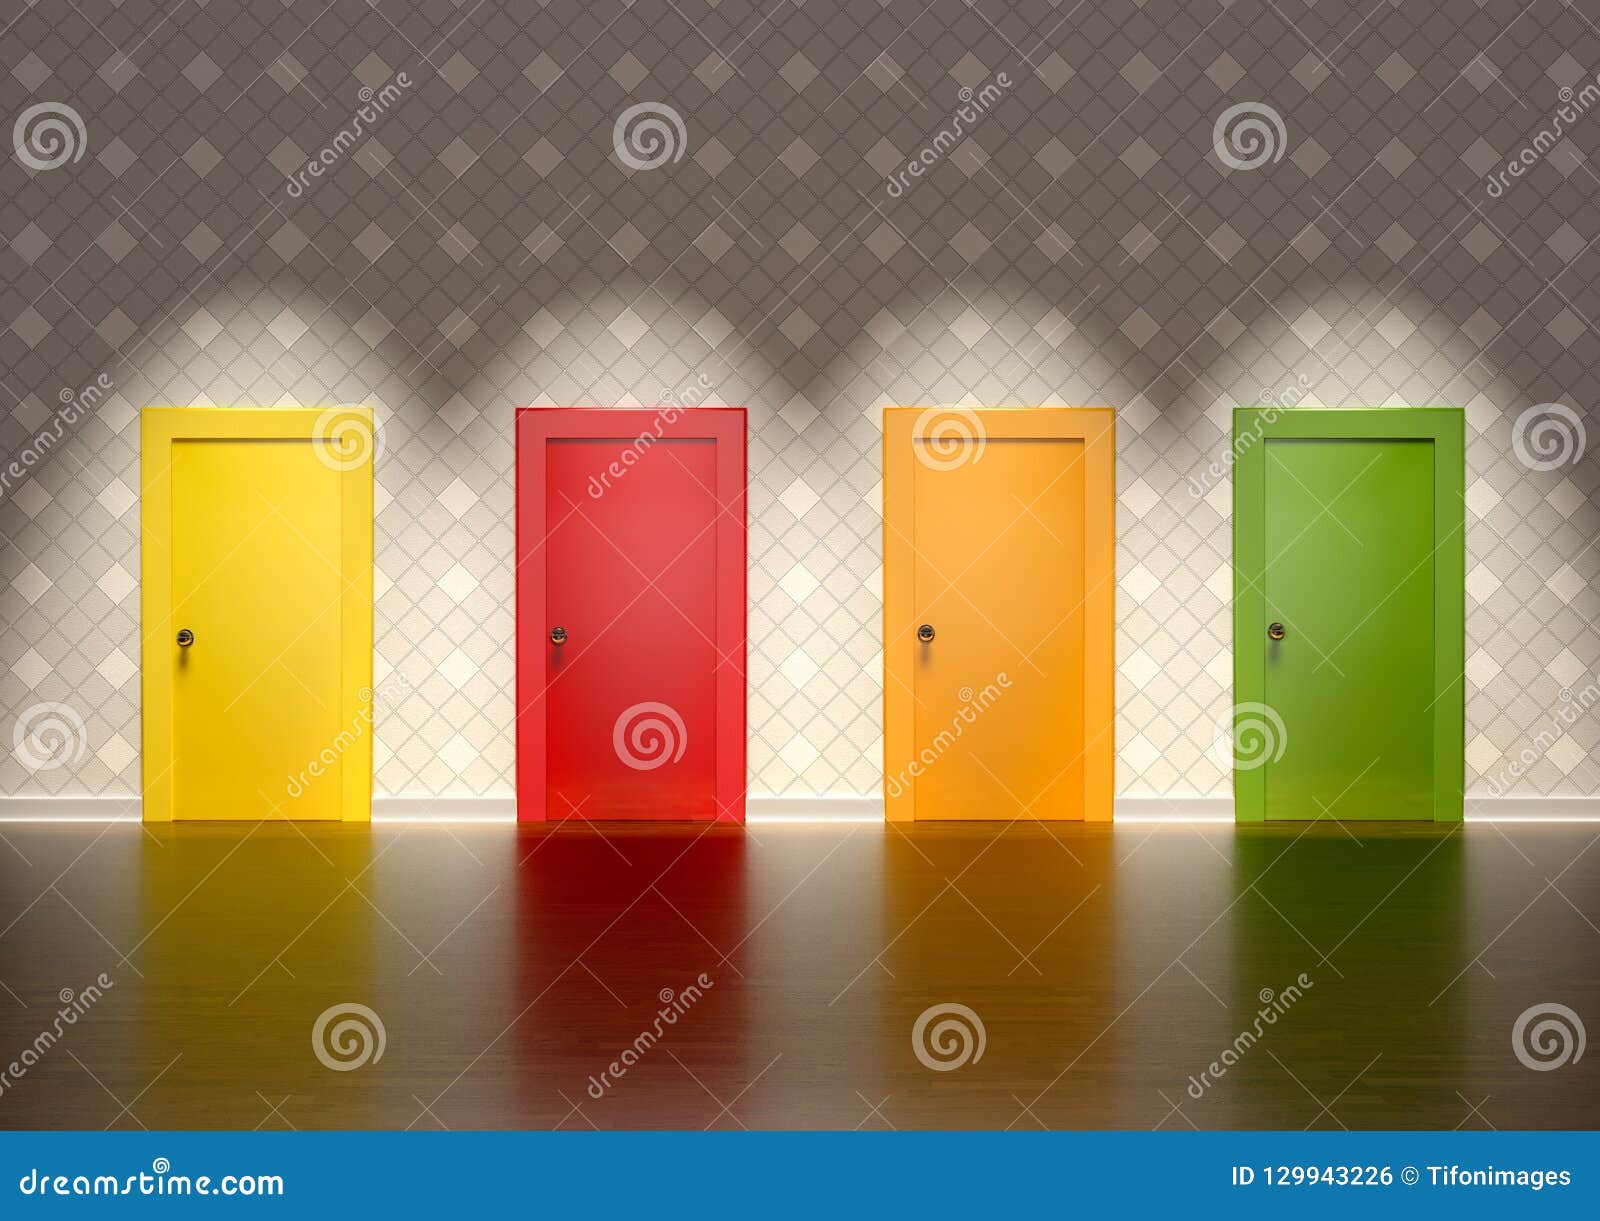 colored doors in a room representing the concept of choice